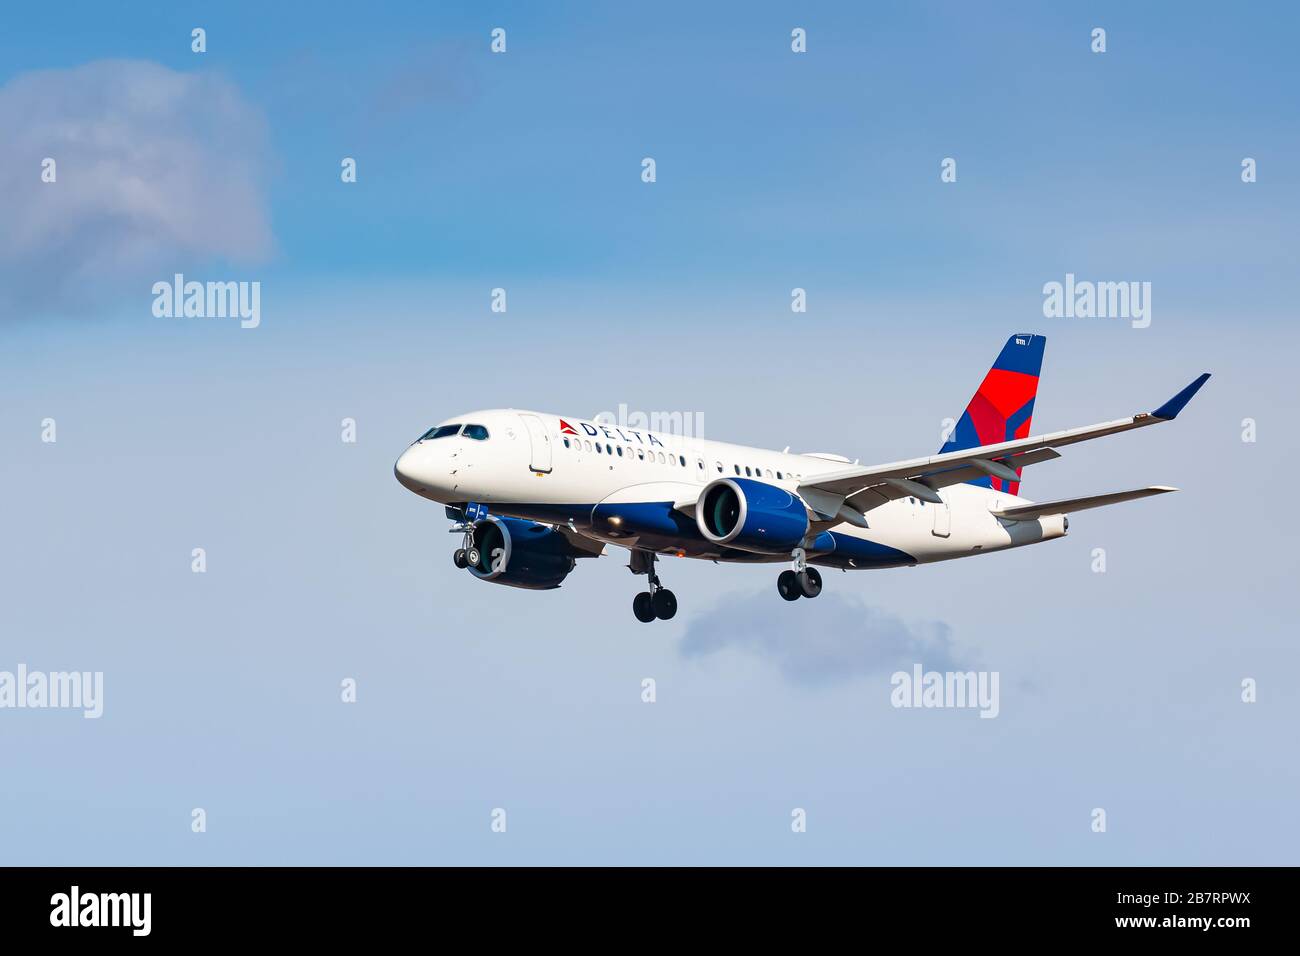 New York, USA - February 29, 2020: Delta Air Lines Airbus A220-300 airplane at New York John F. Kennedy airport (JFK) in the USA. Airbus is an aircraf Stock Photo